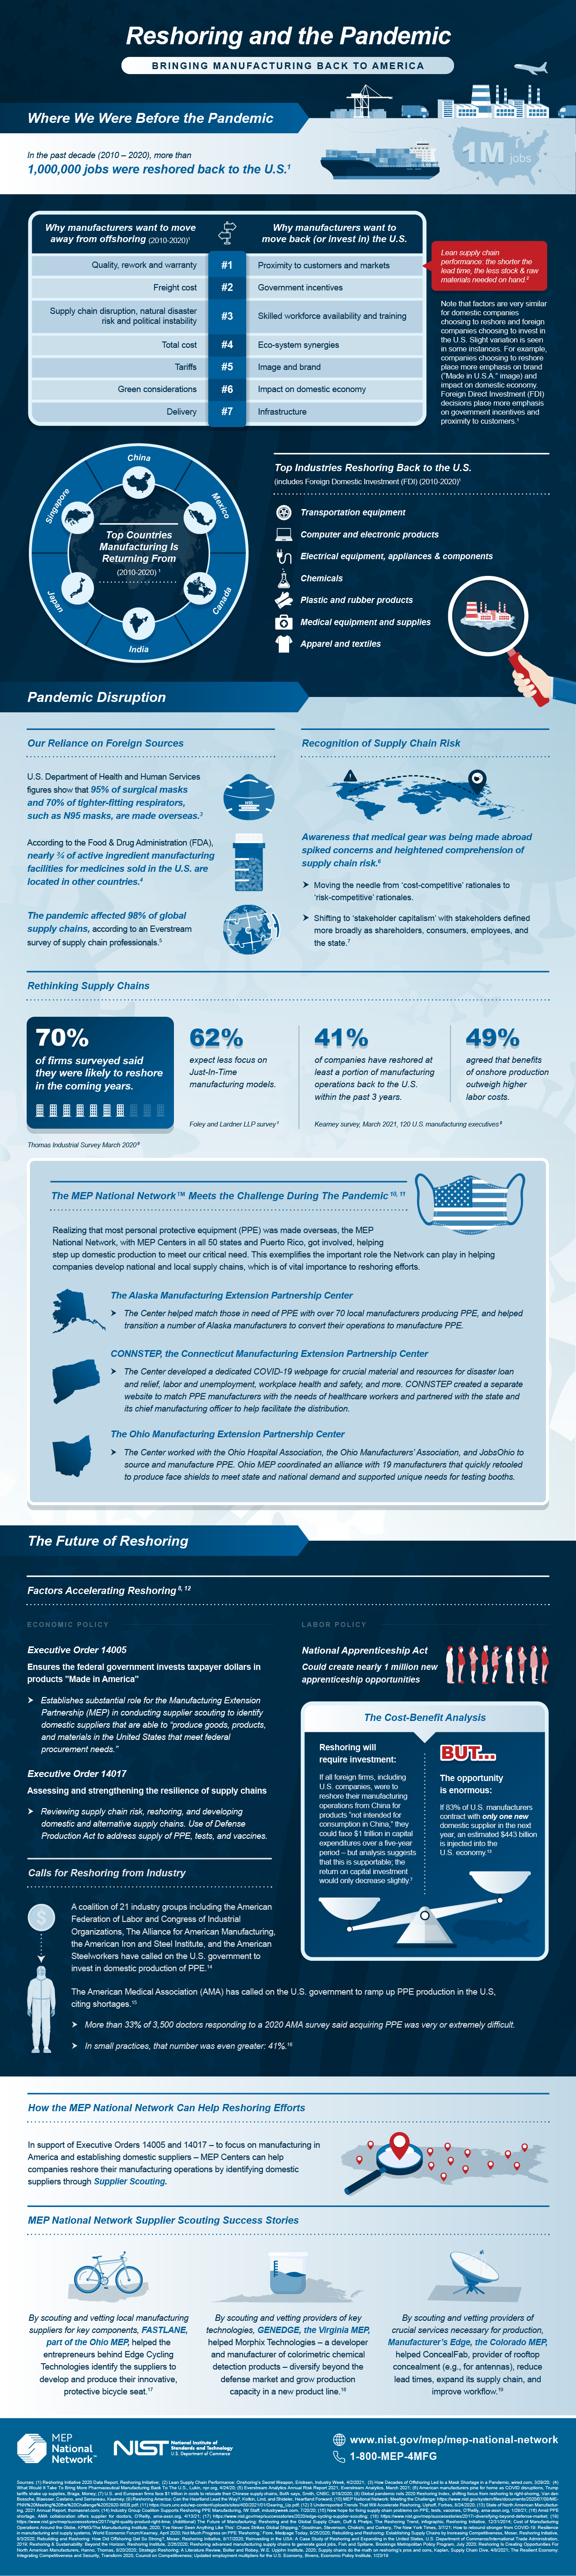 reshoring and the pandemic: bringing manufacturing back to america infographic